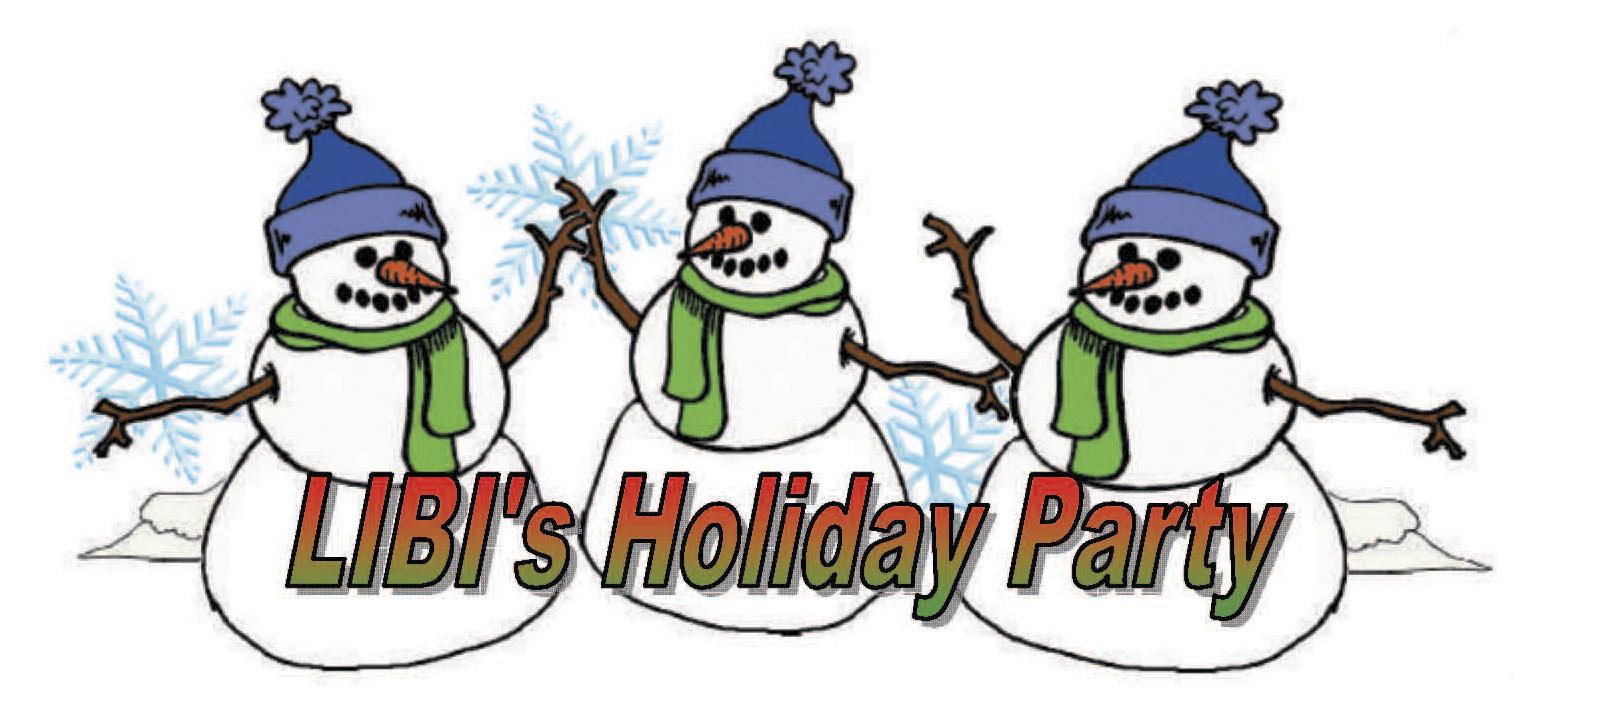 free office holiday party clipart - photo #11